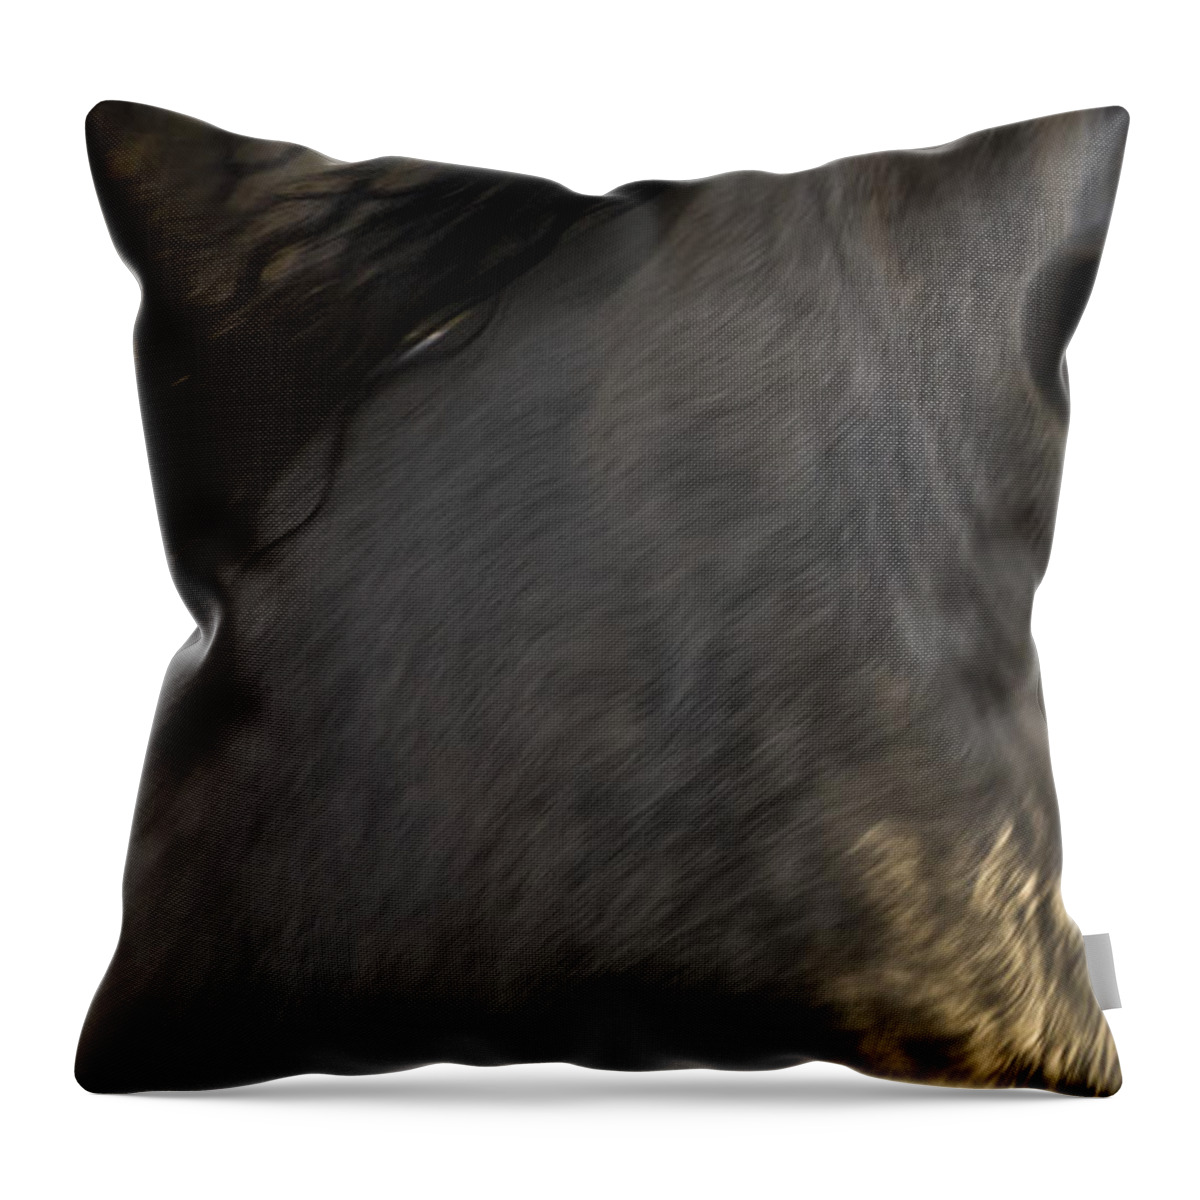 Andalusia Throw Pillow featuring the photograph Americano 3 by Catherine Sobredo